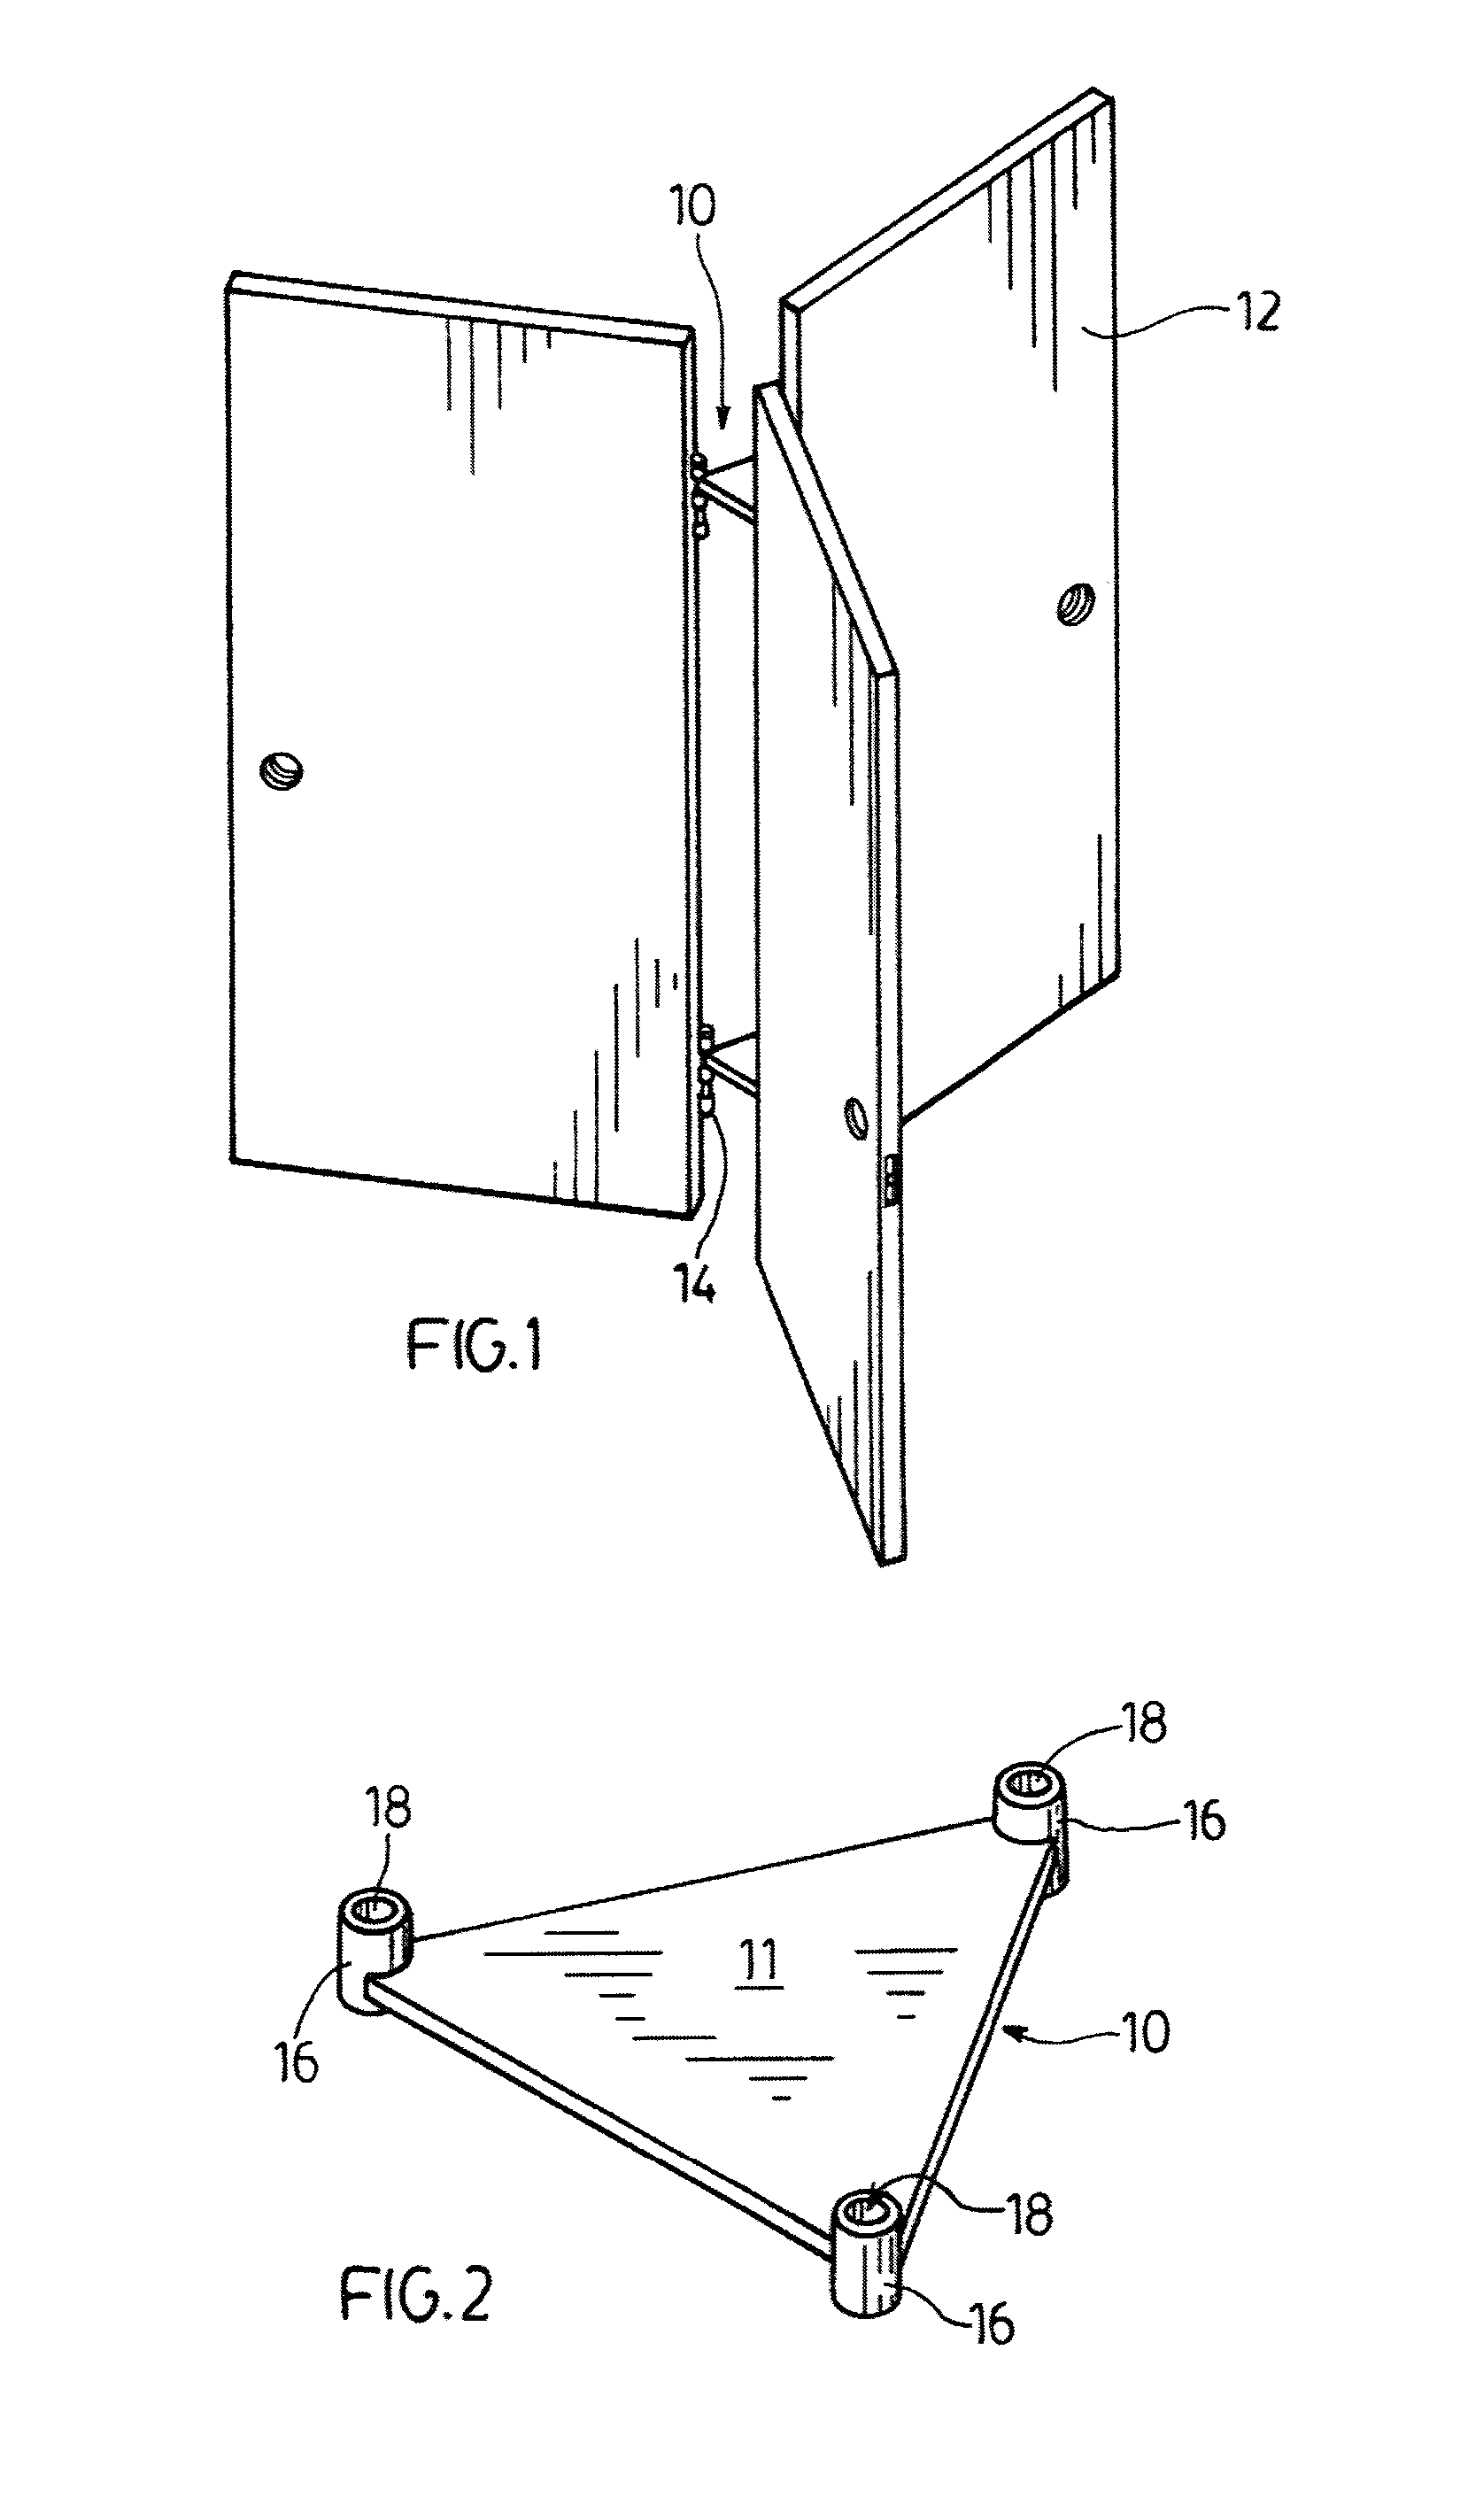 Device, kit, and method for maintaining a plurality of doors in an upright position for treatment